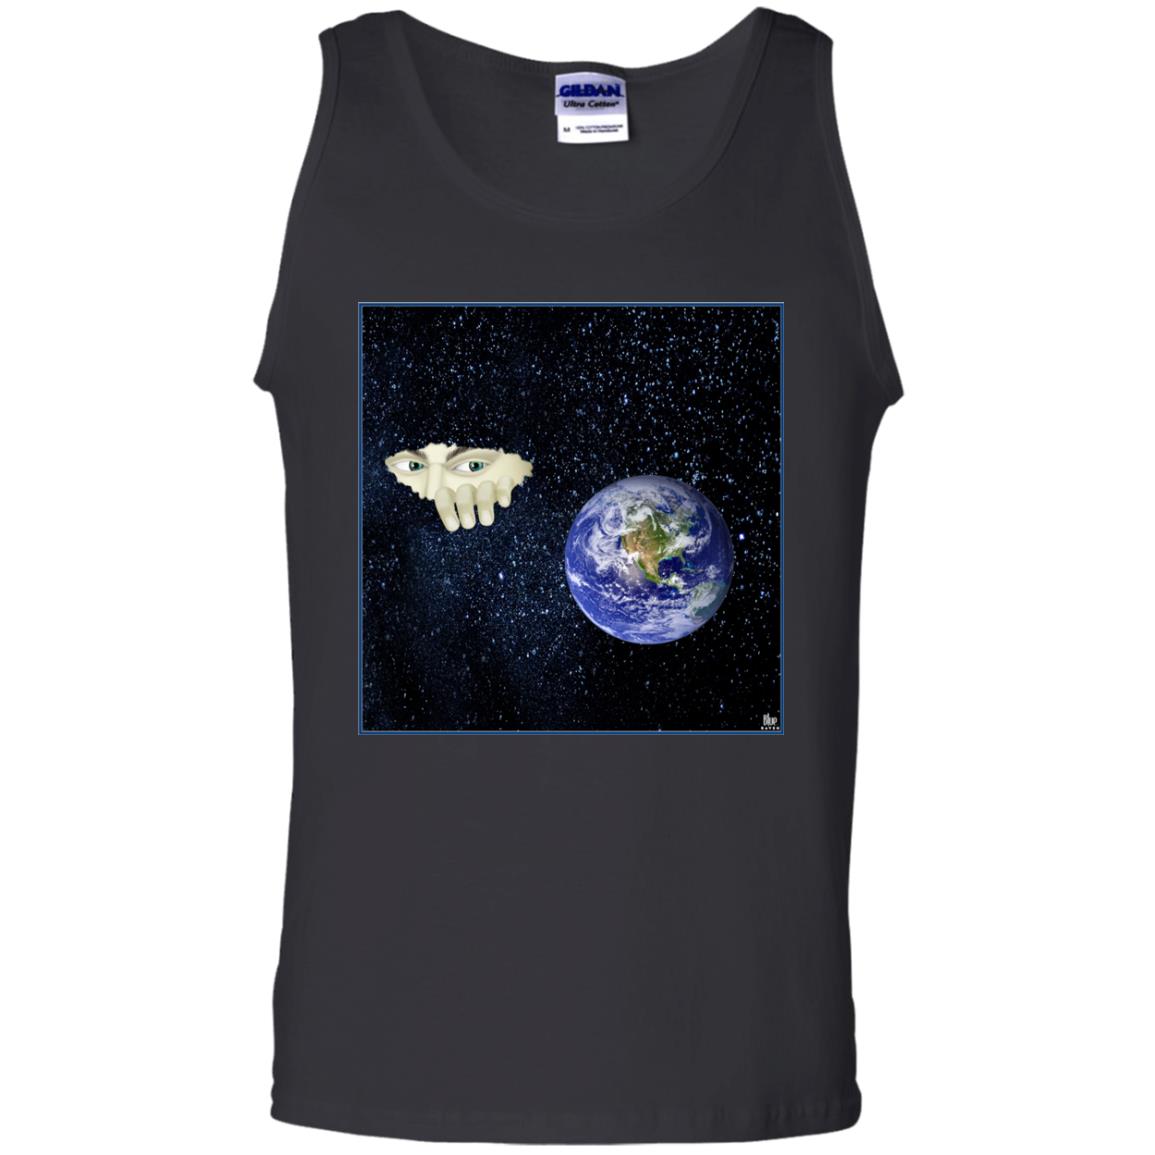 SOMEWHERE OUT THERE - Men's Tank Top